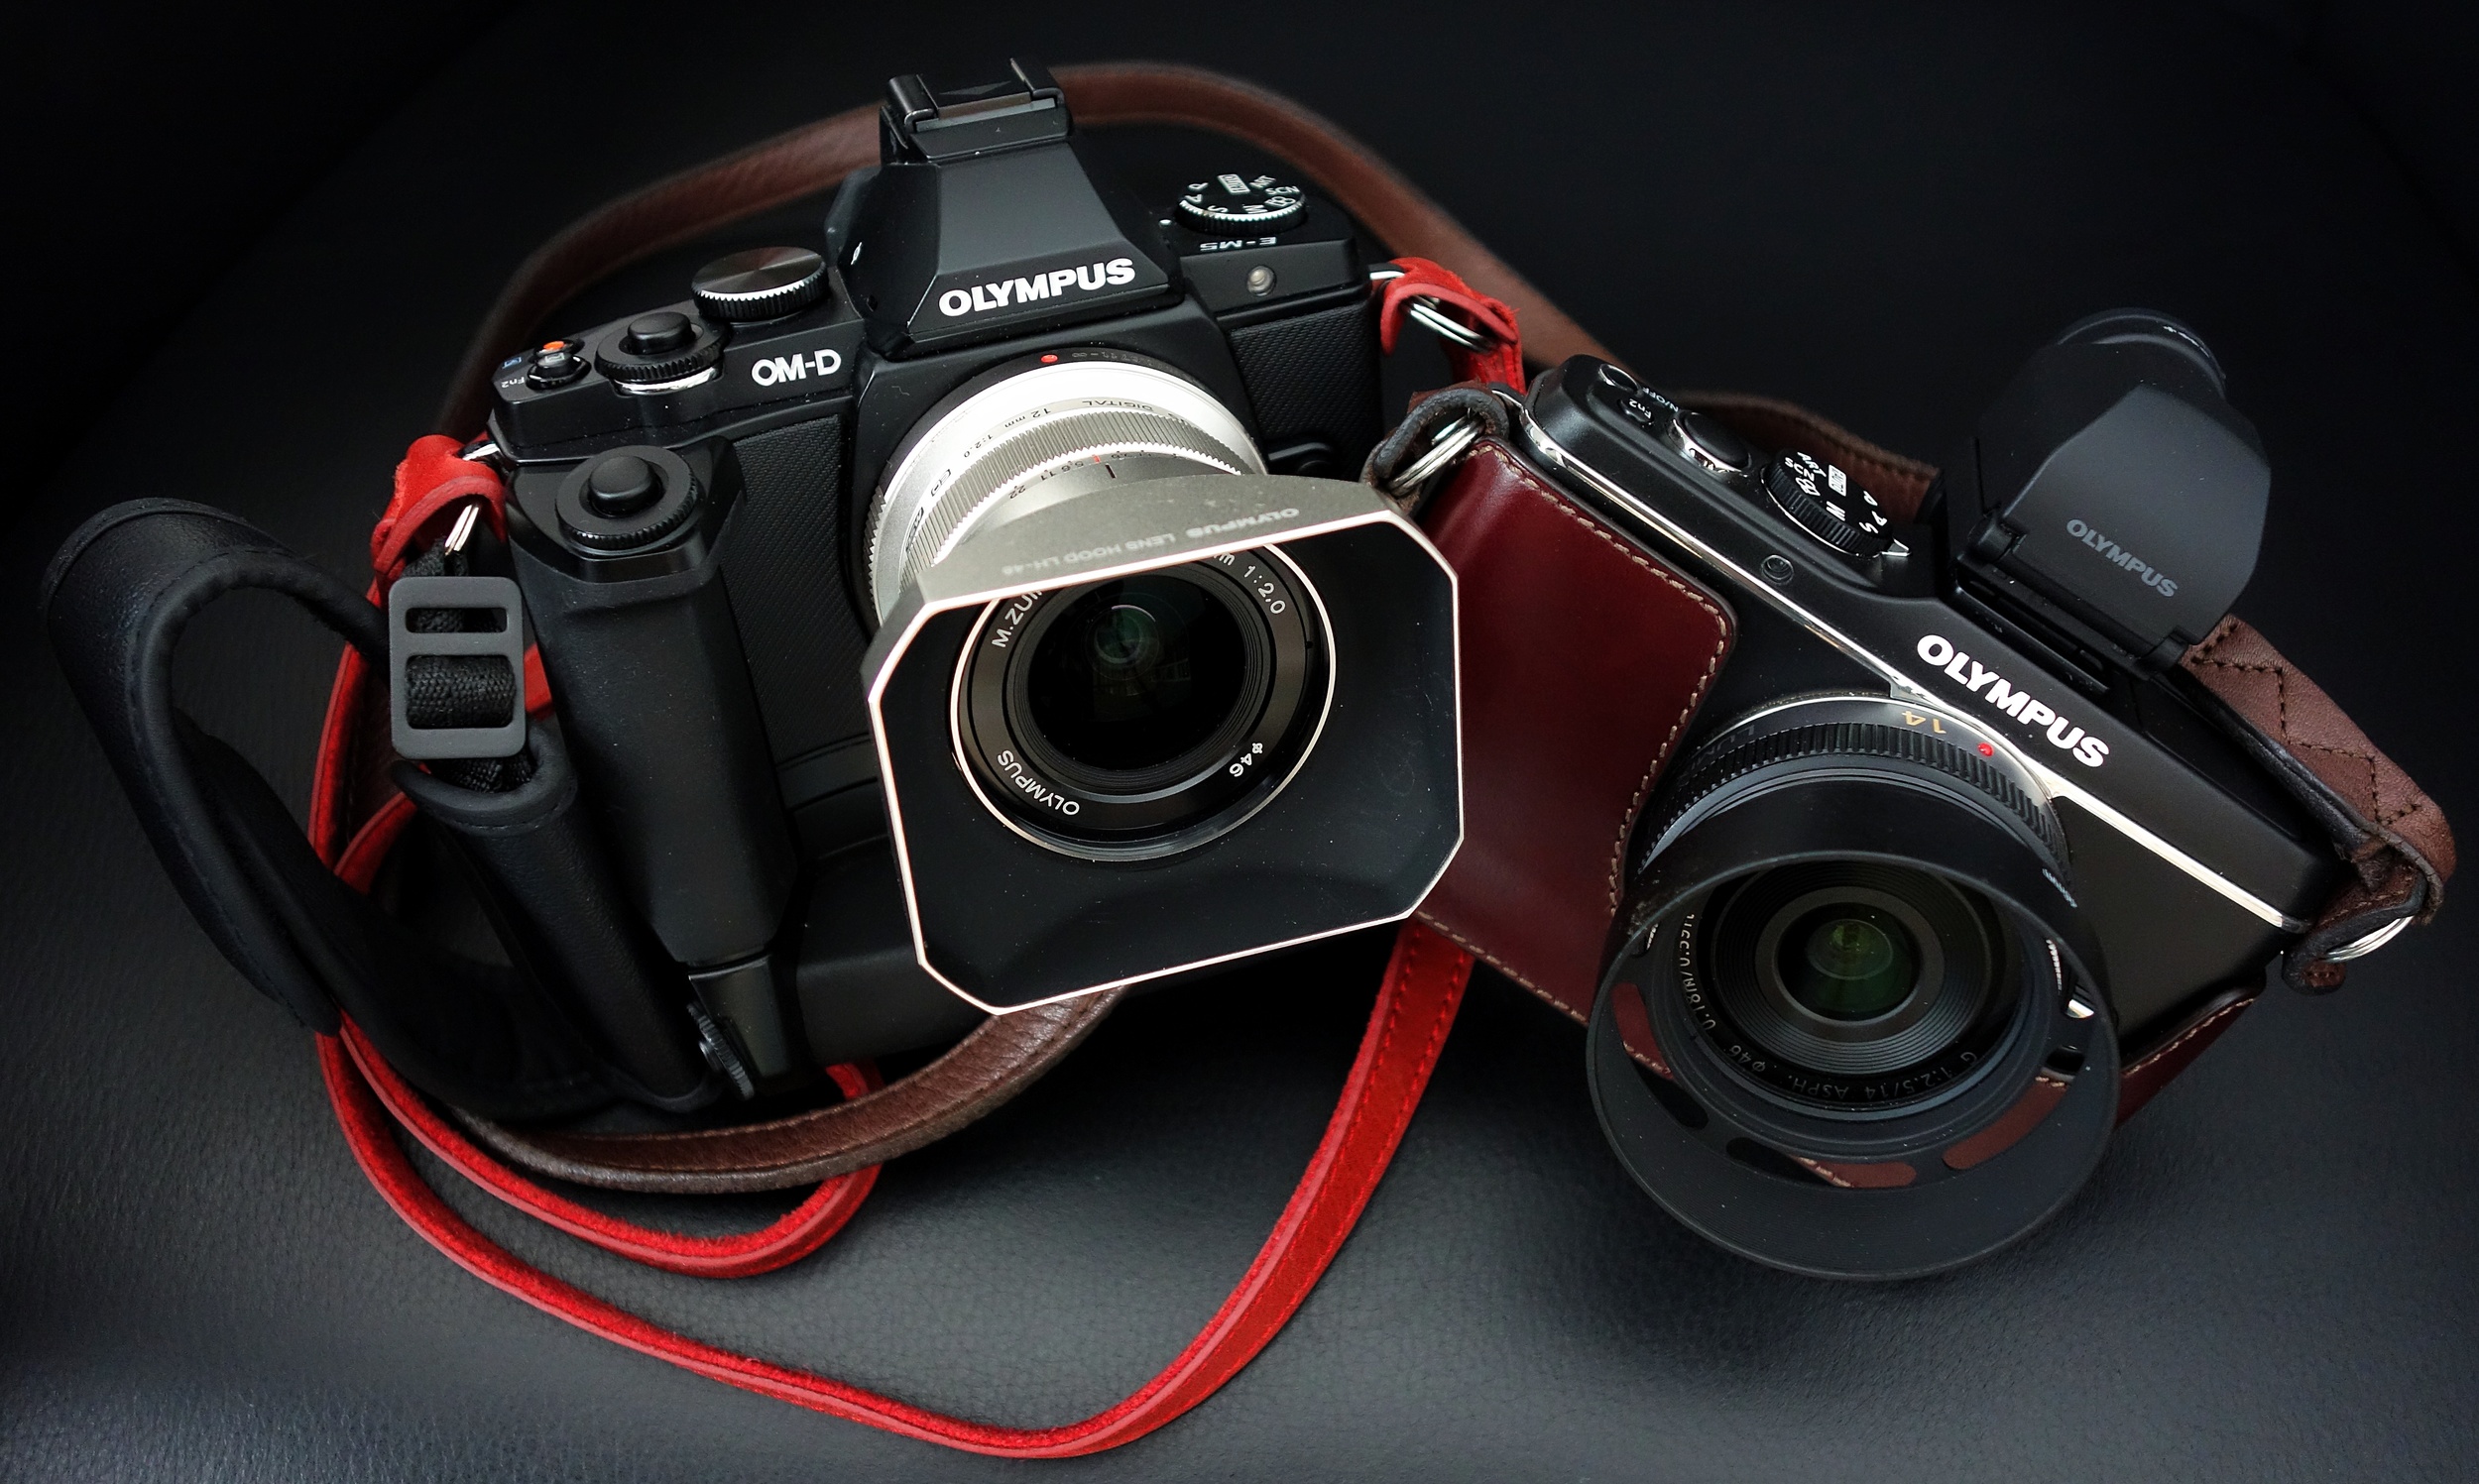    Sporting a magnesium alloy body, weather sealing, a 16MP sensor, 5-axis in-body image stabilisation, tilting touchscreen and electronic viewfinder, 2011's Micro Four-Thirds OM-D E-M5 was a mirror-less tribute to the legendary OM line of film camer